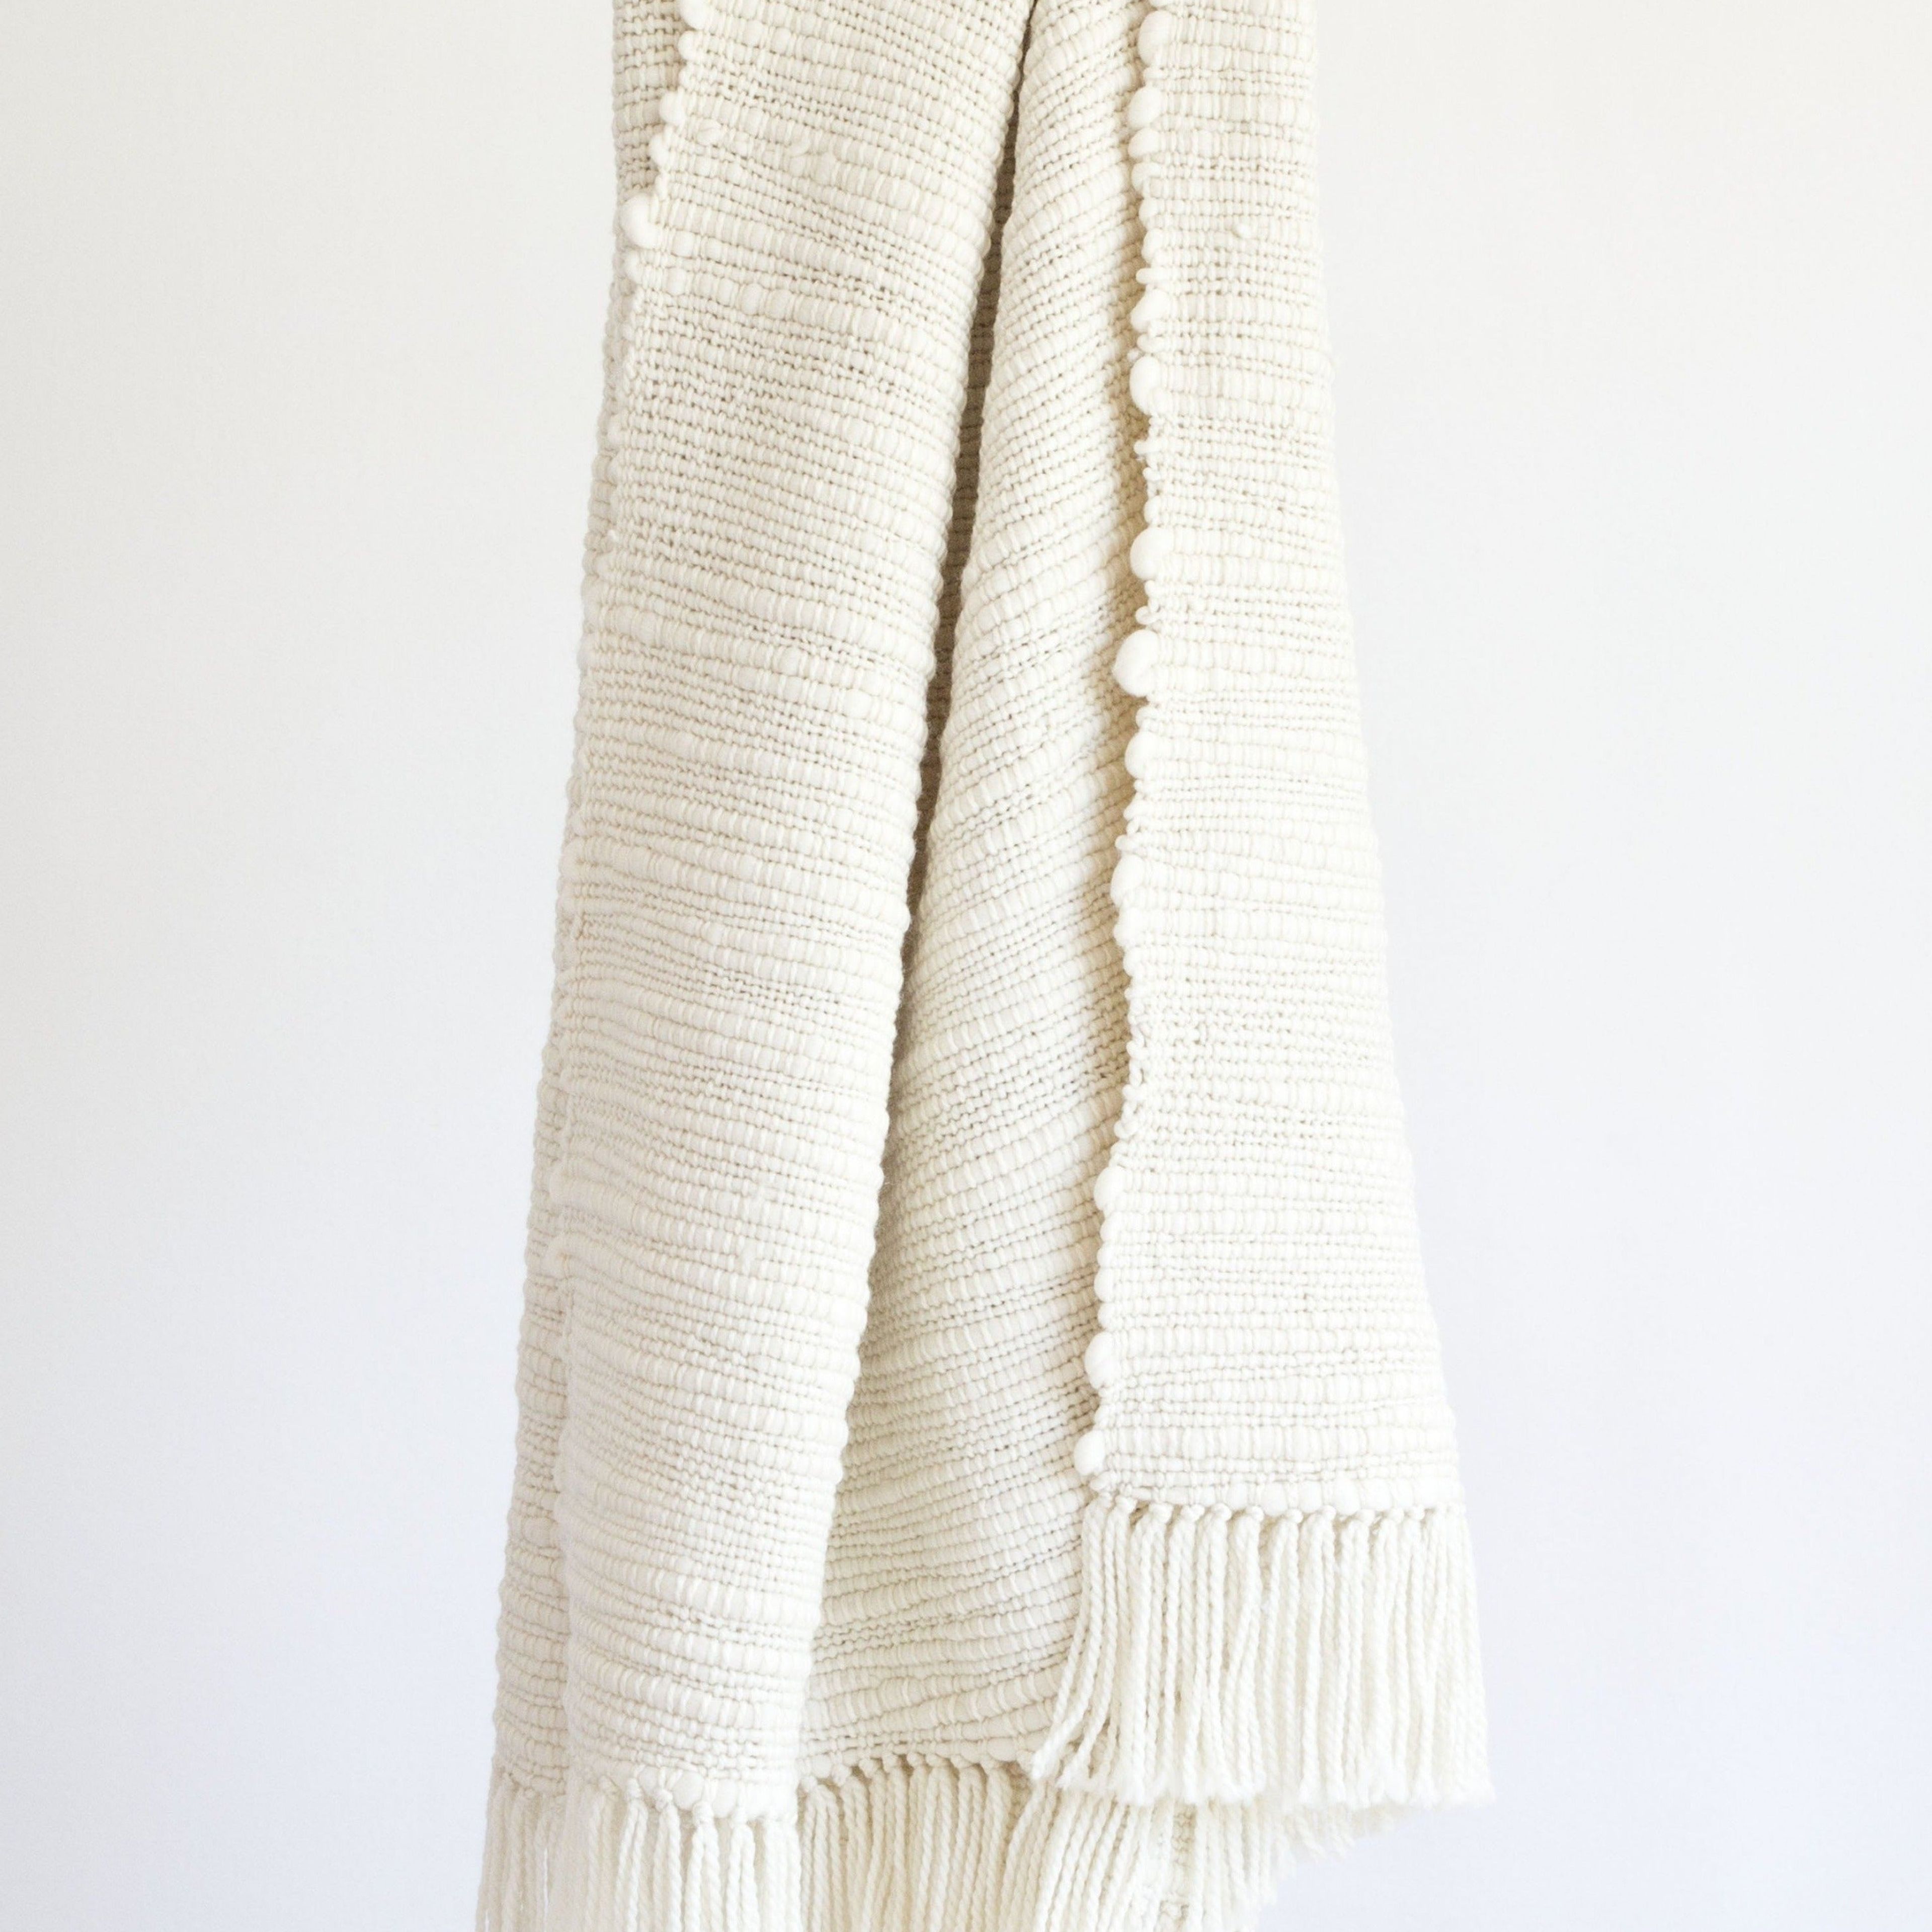 Aroma Throw Blanket - Handwoven Chunky Merino Wool with Fringes - Luxurious, Eco-Friendly and Perfect to Elevate Your Home Decor